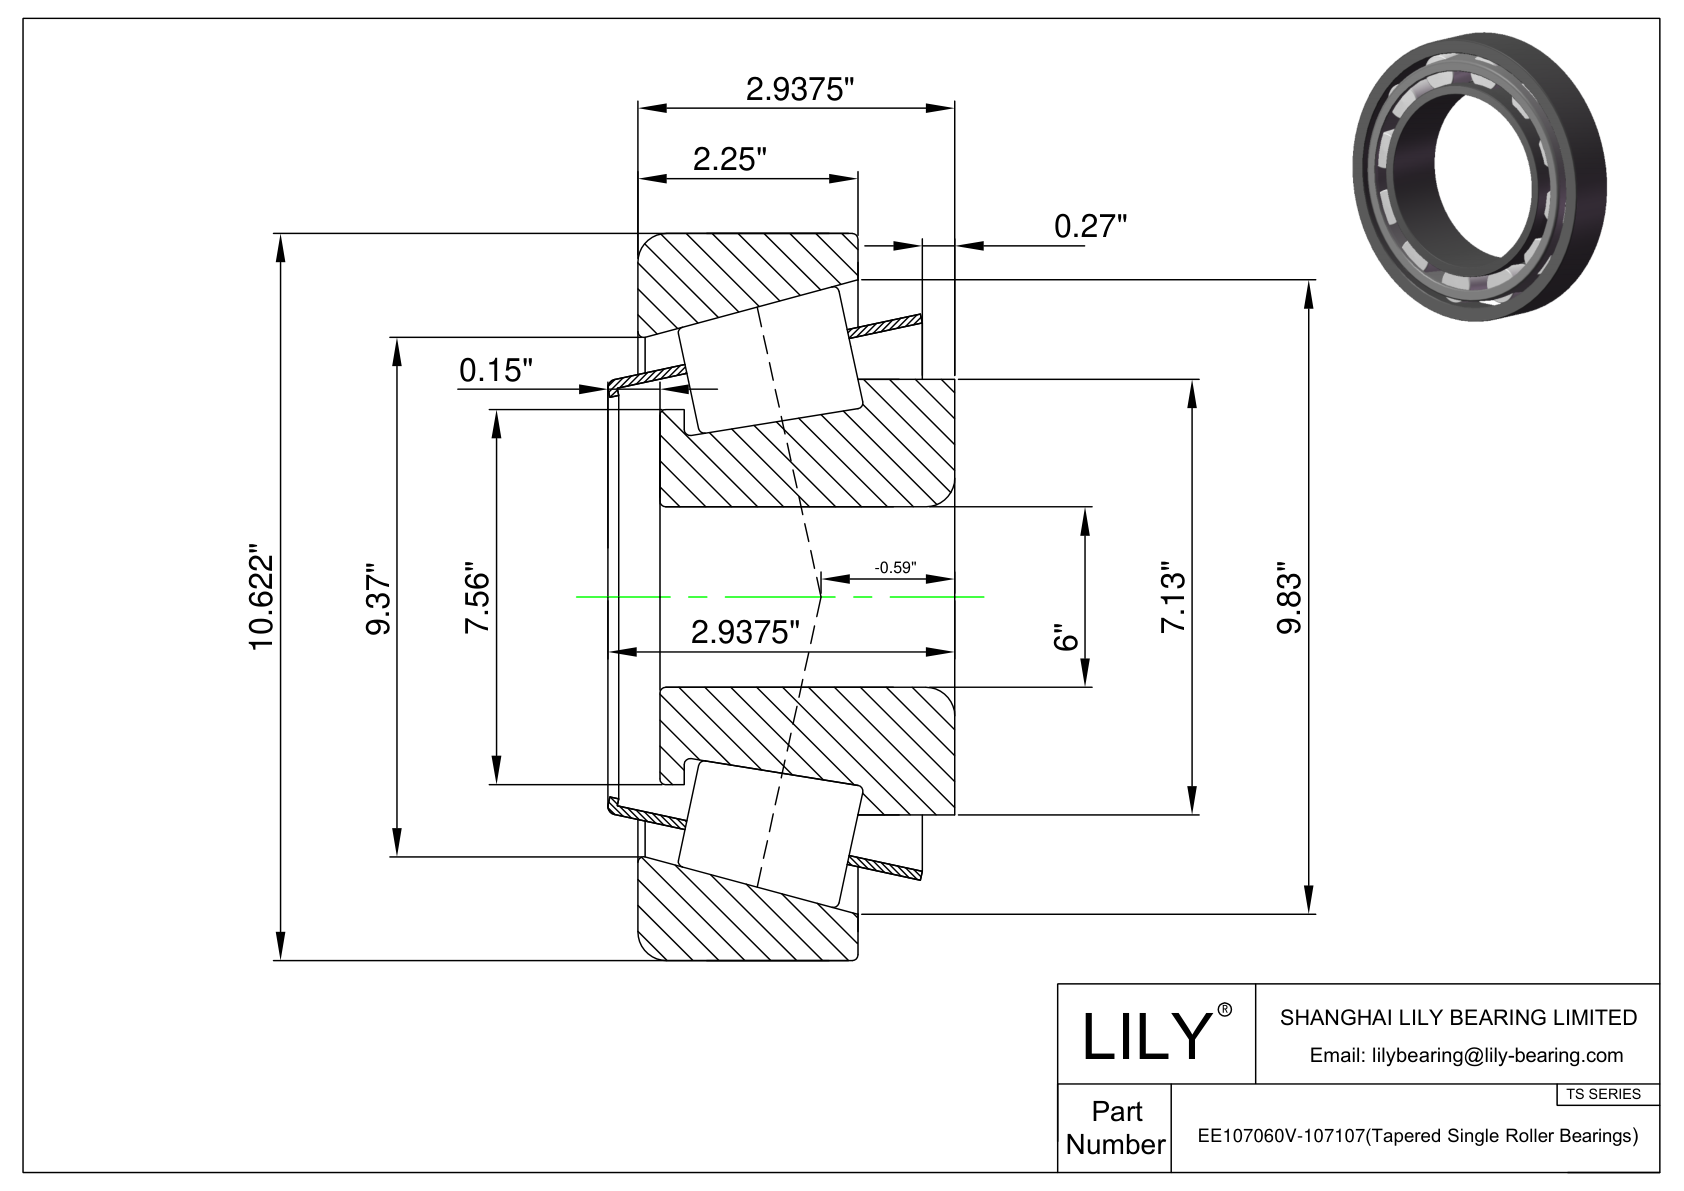 EE107060V-107107 TS (Tapered Single Roller Bearings) (Imperial) cad drawing